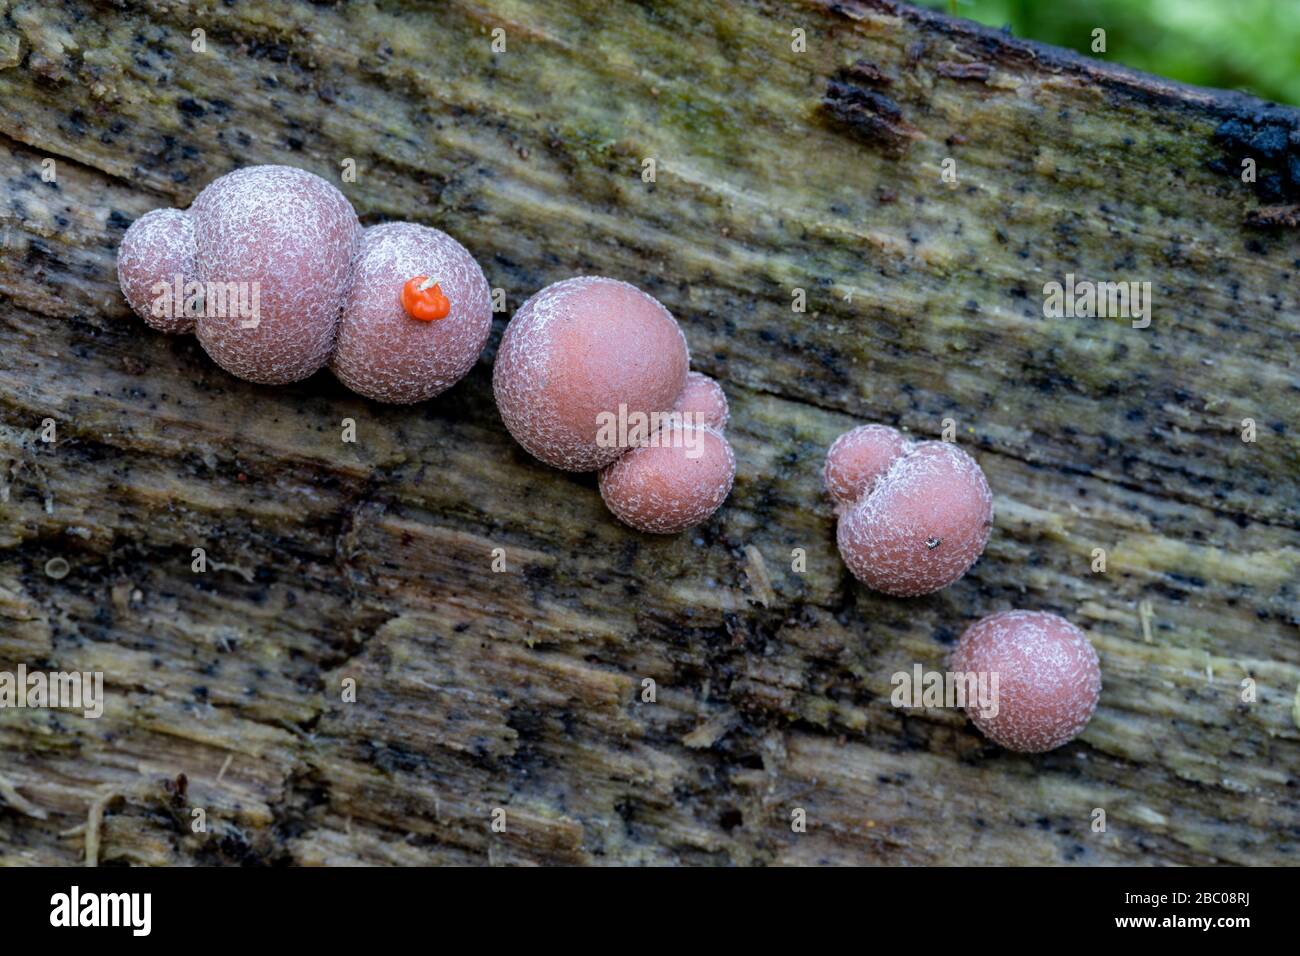 Lycogala epidendrum, known as wolf's milk, growing on a dead log in the woods in autumn. Spain Stock Photo